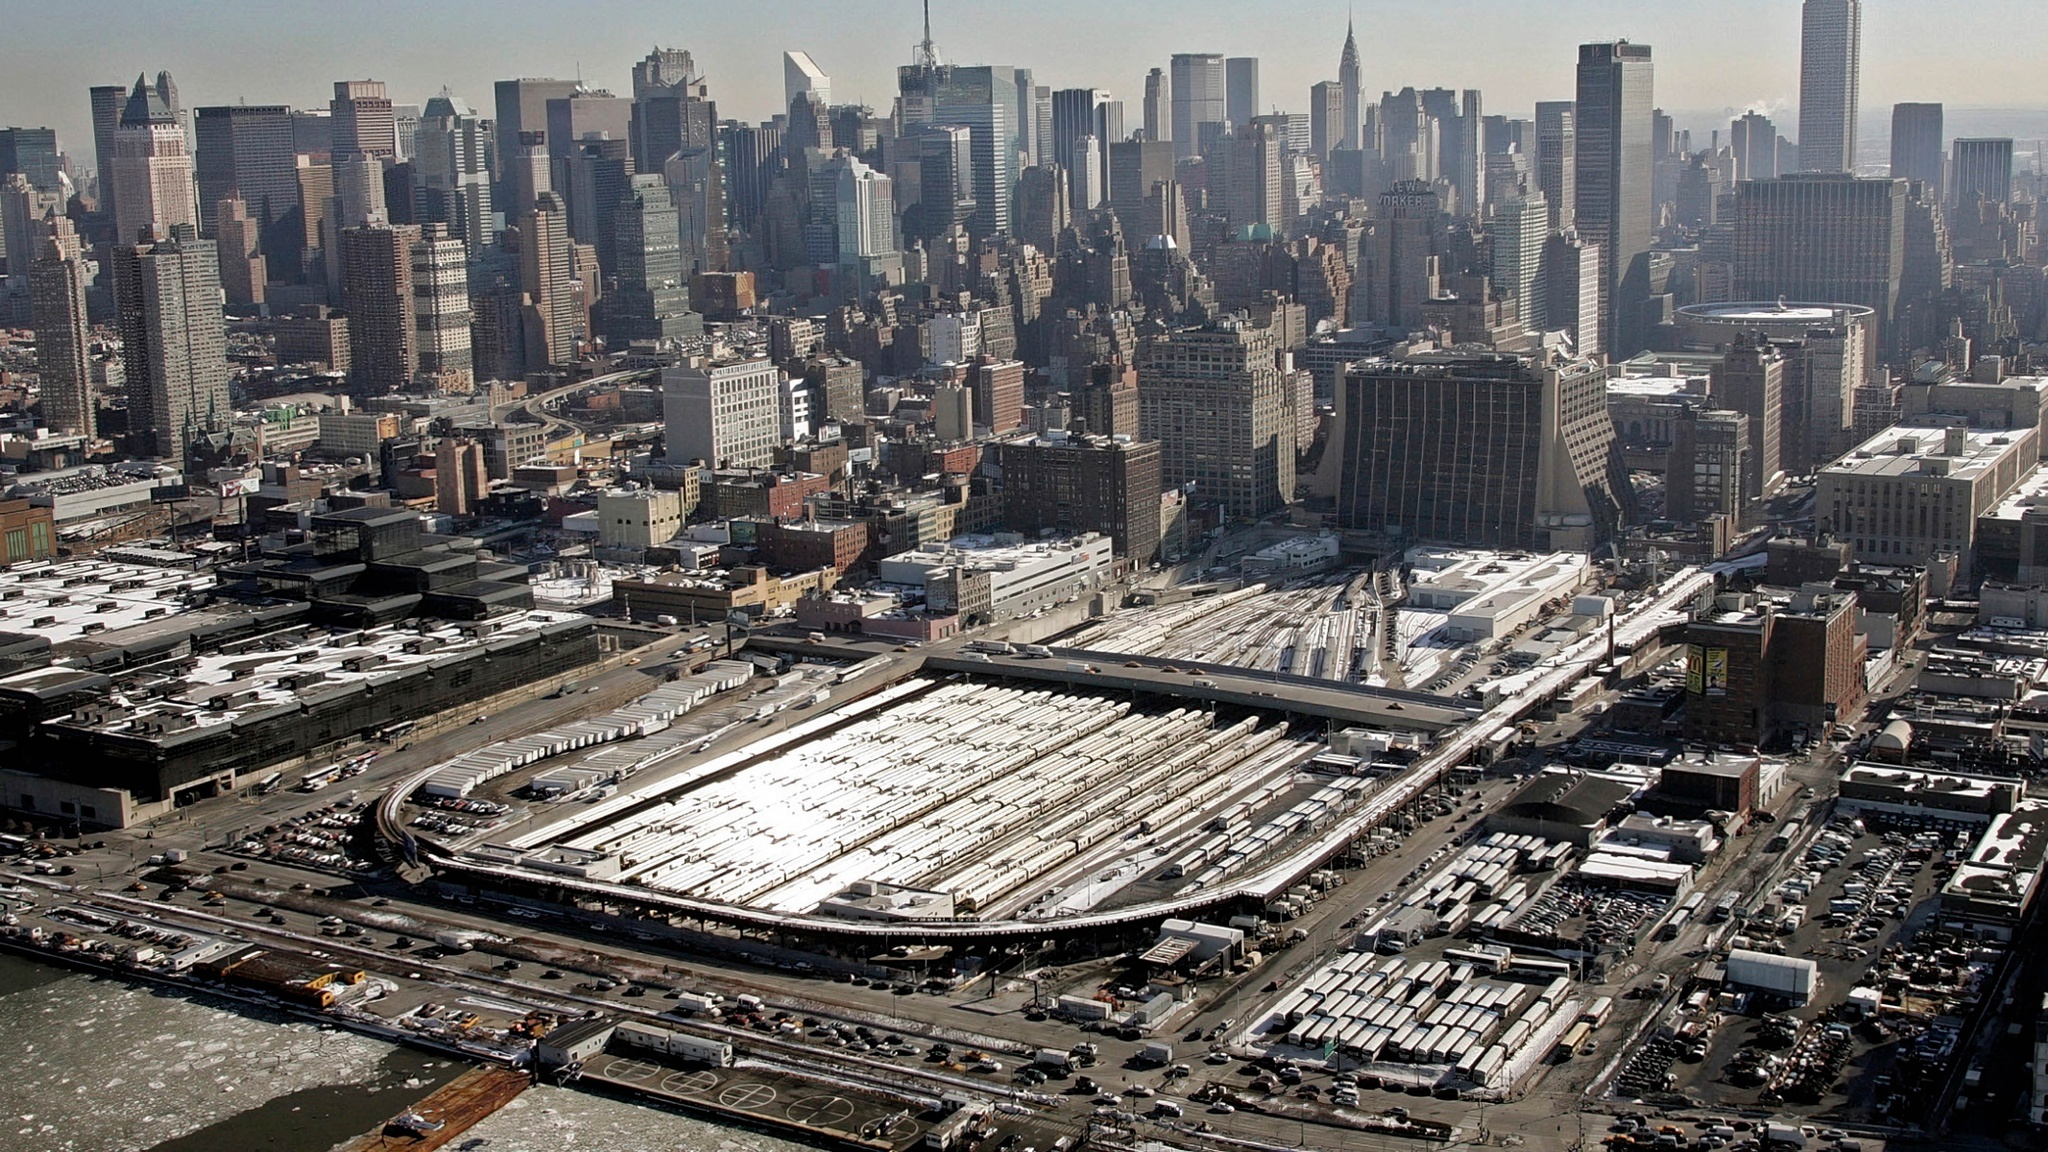 The New York skyline seen on a sunny day from the west side above the Hudson River. Prominent in the foreground are the rail yards covering multiple blocks before the development of Hudson Yards.